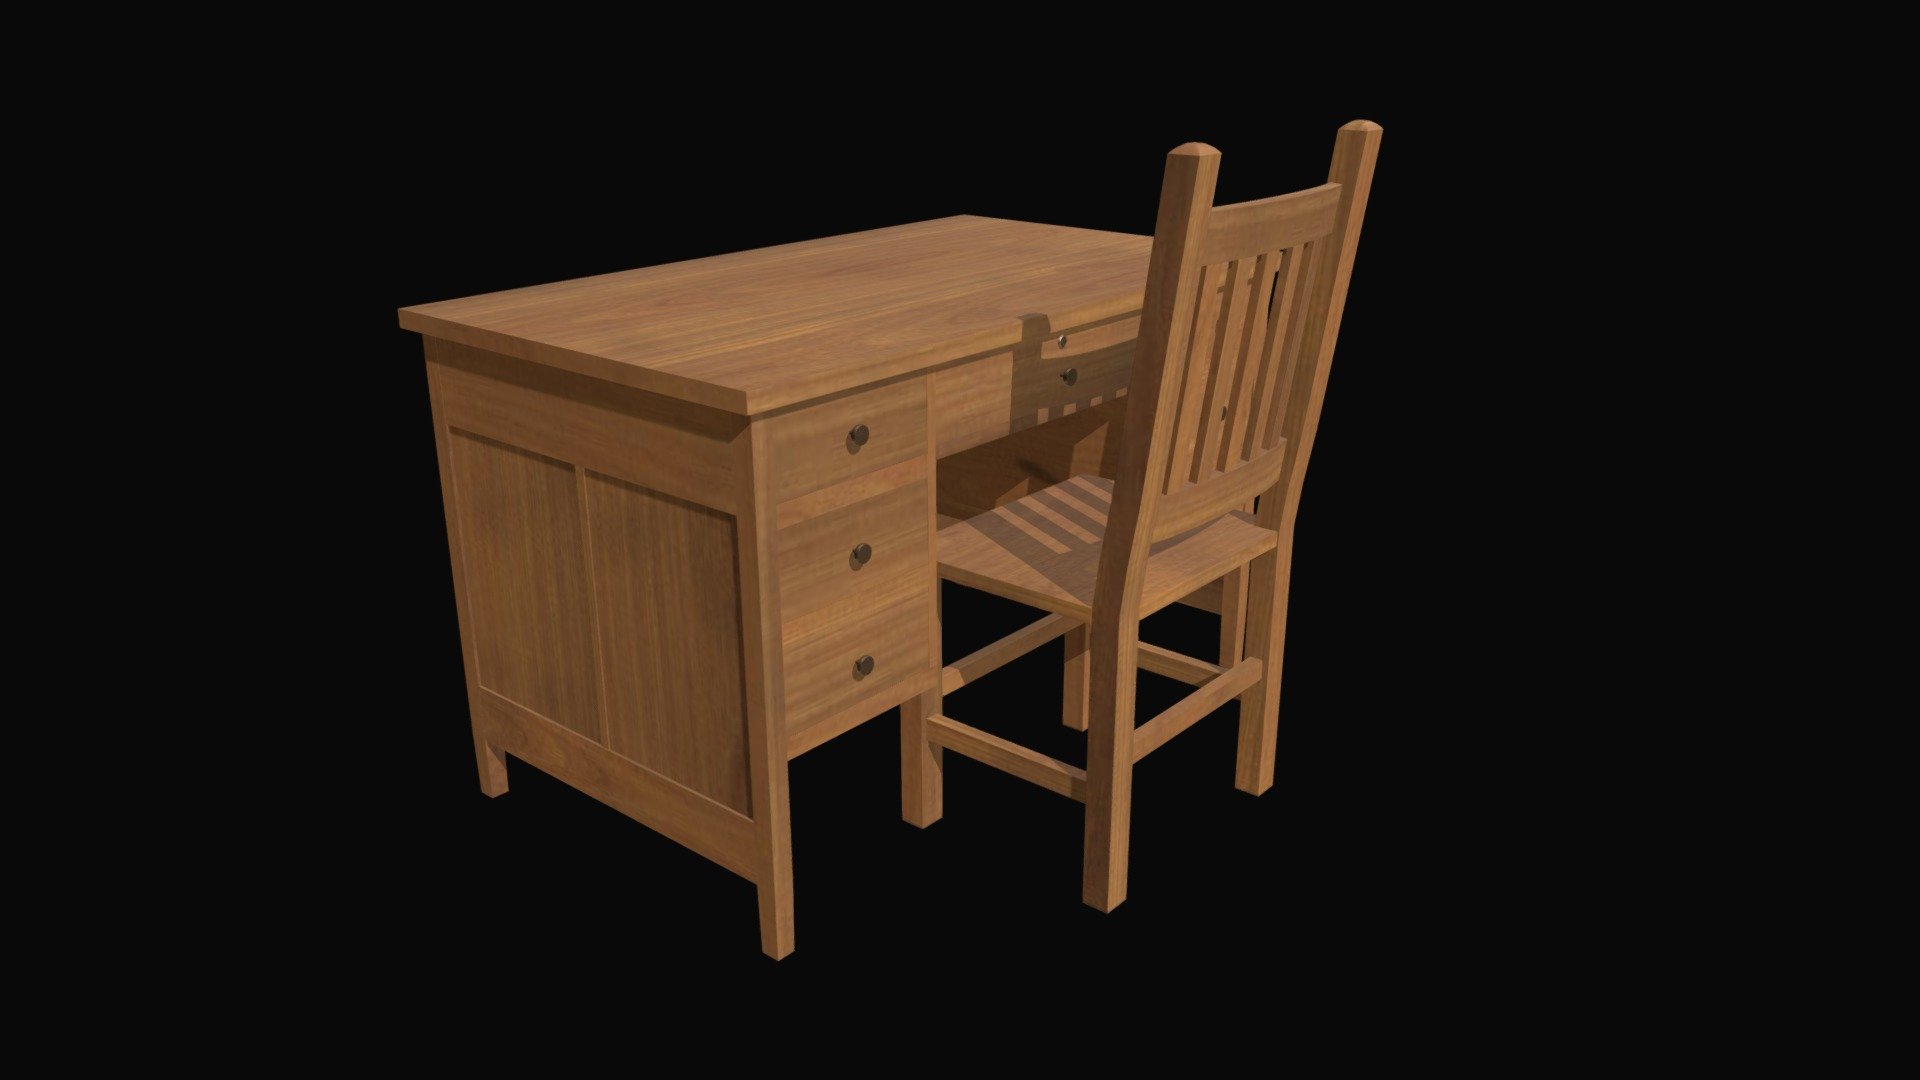 === The following description refers to the additional ZIP package provided with this model ===

Teacher desk 3D Model, nr. 3 in my collection. 9 individual objects (chair, frame, drawers; so, you can easily move or even animate them), sharing the same non overlapping UV Layout map, Material and PBR Textures set. Production-ready 3D Model, with PBR materials, textures, non overlapping UV Layout map provided in the package.

Quads only geometries (no tris/ngons).

Formats included: FBX, OBJ; scenes: BLEND (with Cycles / Eevee PBR Materials and Textures); other: png with Alpha.

9 Objects (meshes), 1 PBR Material, UV unwrapped (non overlapping UV Layout map provided in the package); UV-mapped Textures.

UV Layout maps and Image Textures resolutions: 2048x2048; PBR Textures made with Substance Painter.

Polygonal, QUADS ONLY (no tris/ngons); 40956 vertices, 40582 quad faces (81164 tris).

Real world dimensions; scene scale units: cm in Blender 3.1 (that is: Metric with 0.01 scale) 3d model